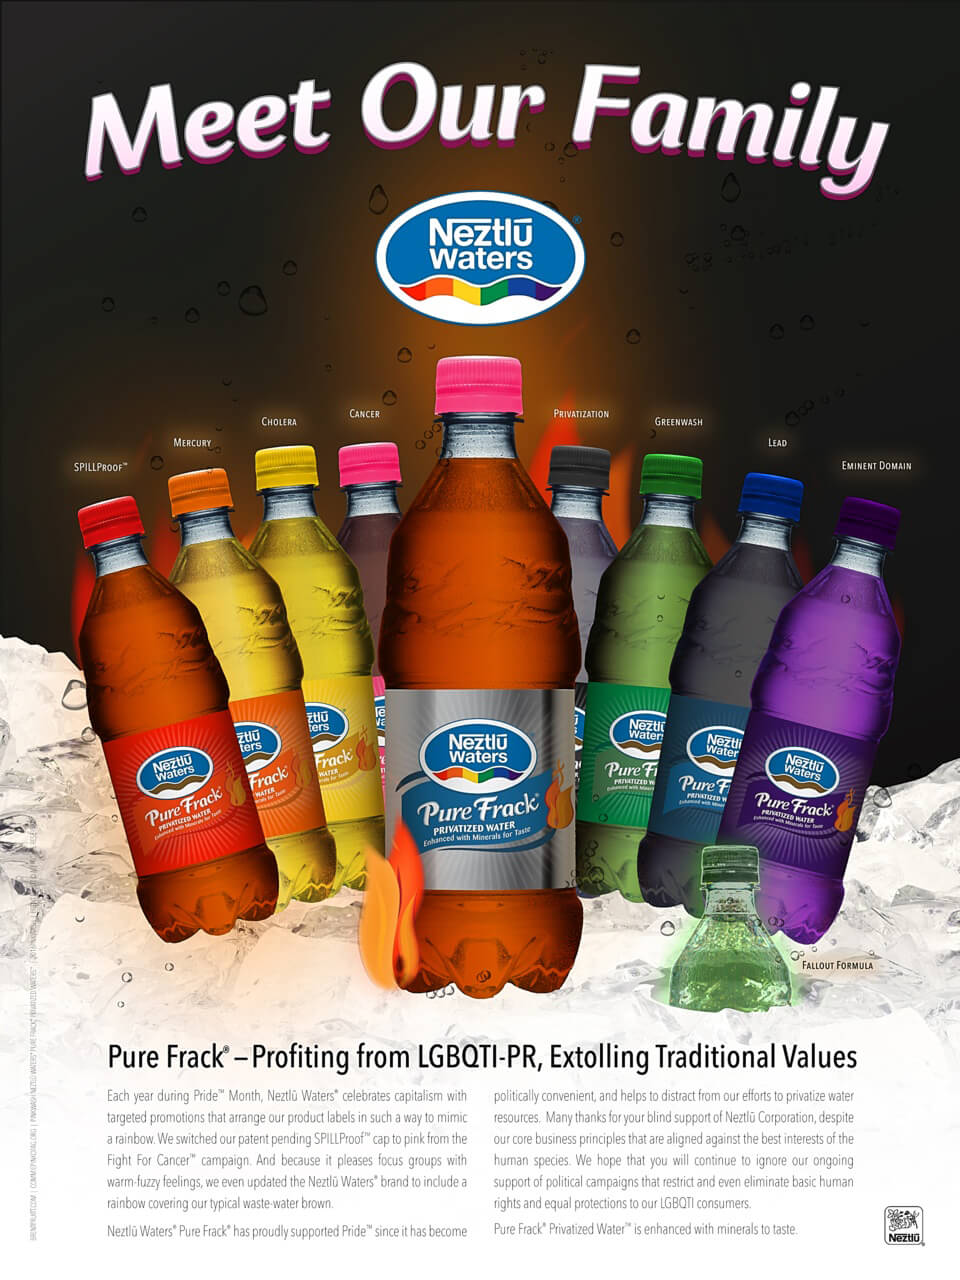 Meet Our Family Pure Frack® — Profiting from LGBQTI-PR, Extolling Traditional Values Each year during Pride™ Month, Neztlū Waters® celebrates capitalism with targeted promotions that arrange our product labels in such a way to mimic a rainbow. We switched our patent pending SPILLProof™ cap to pink from the Fight For Cancer™ campaign. And because it pleases focus groups with warm-fuzzy feelings, we even updated the Neztlū Waters® brand to include a rainbow covering our typical waste-water brown. Neztlū Waters® Pure Frack® has proudly supported Pride™ since it has become politically convenient, and helps to distract from our efforts to privatize water resources. Many thanks for your blind support of Neztlū Corporation, despite our core business principles that are aligned against the best interests of the human species. We hope that you will continue to ignore our ongoing support of political campaigns that restrict and even eliminate basic human rights and equal protections to our LGBQTI consumers. Pure Frack® Privatized Water™ is enhanced with minerals to taste.